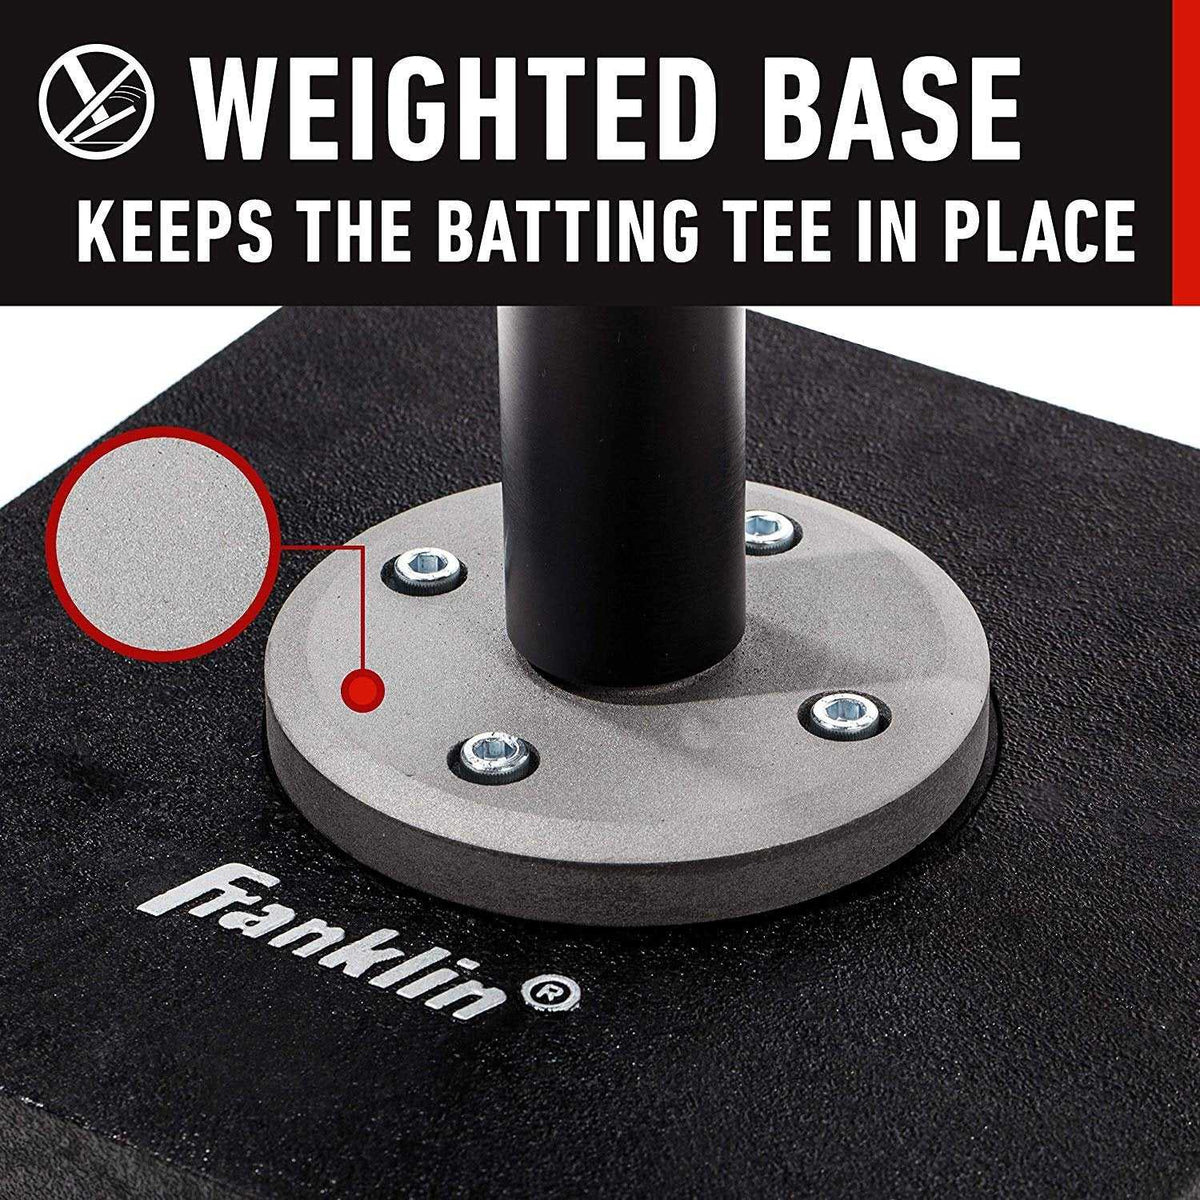 Franklin Sports MLB Total Batting Tee - Black - HIT a Double